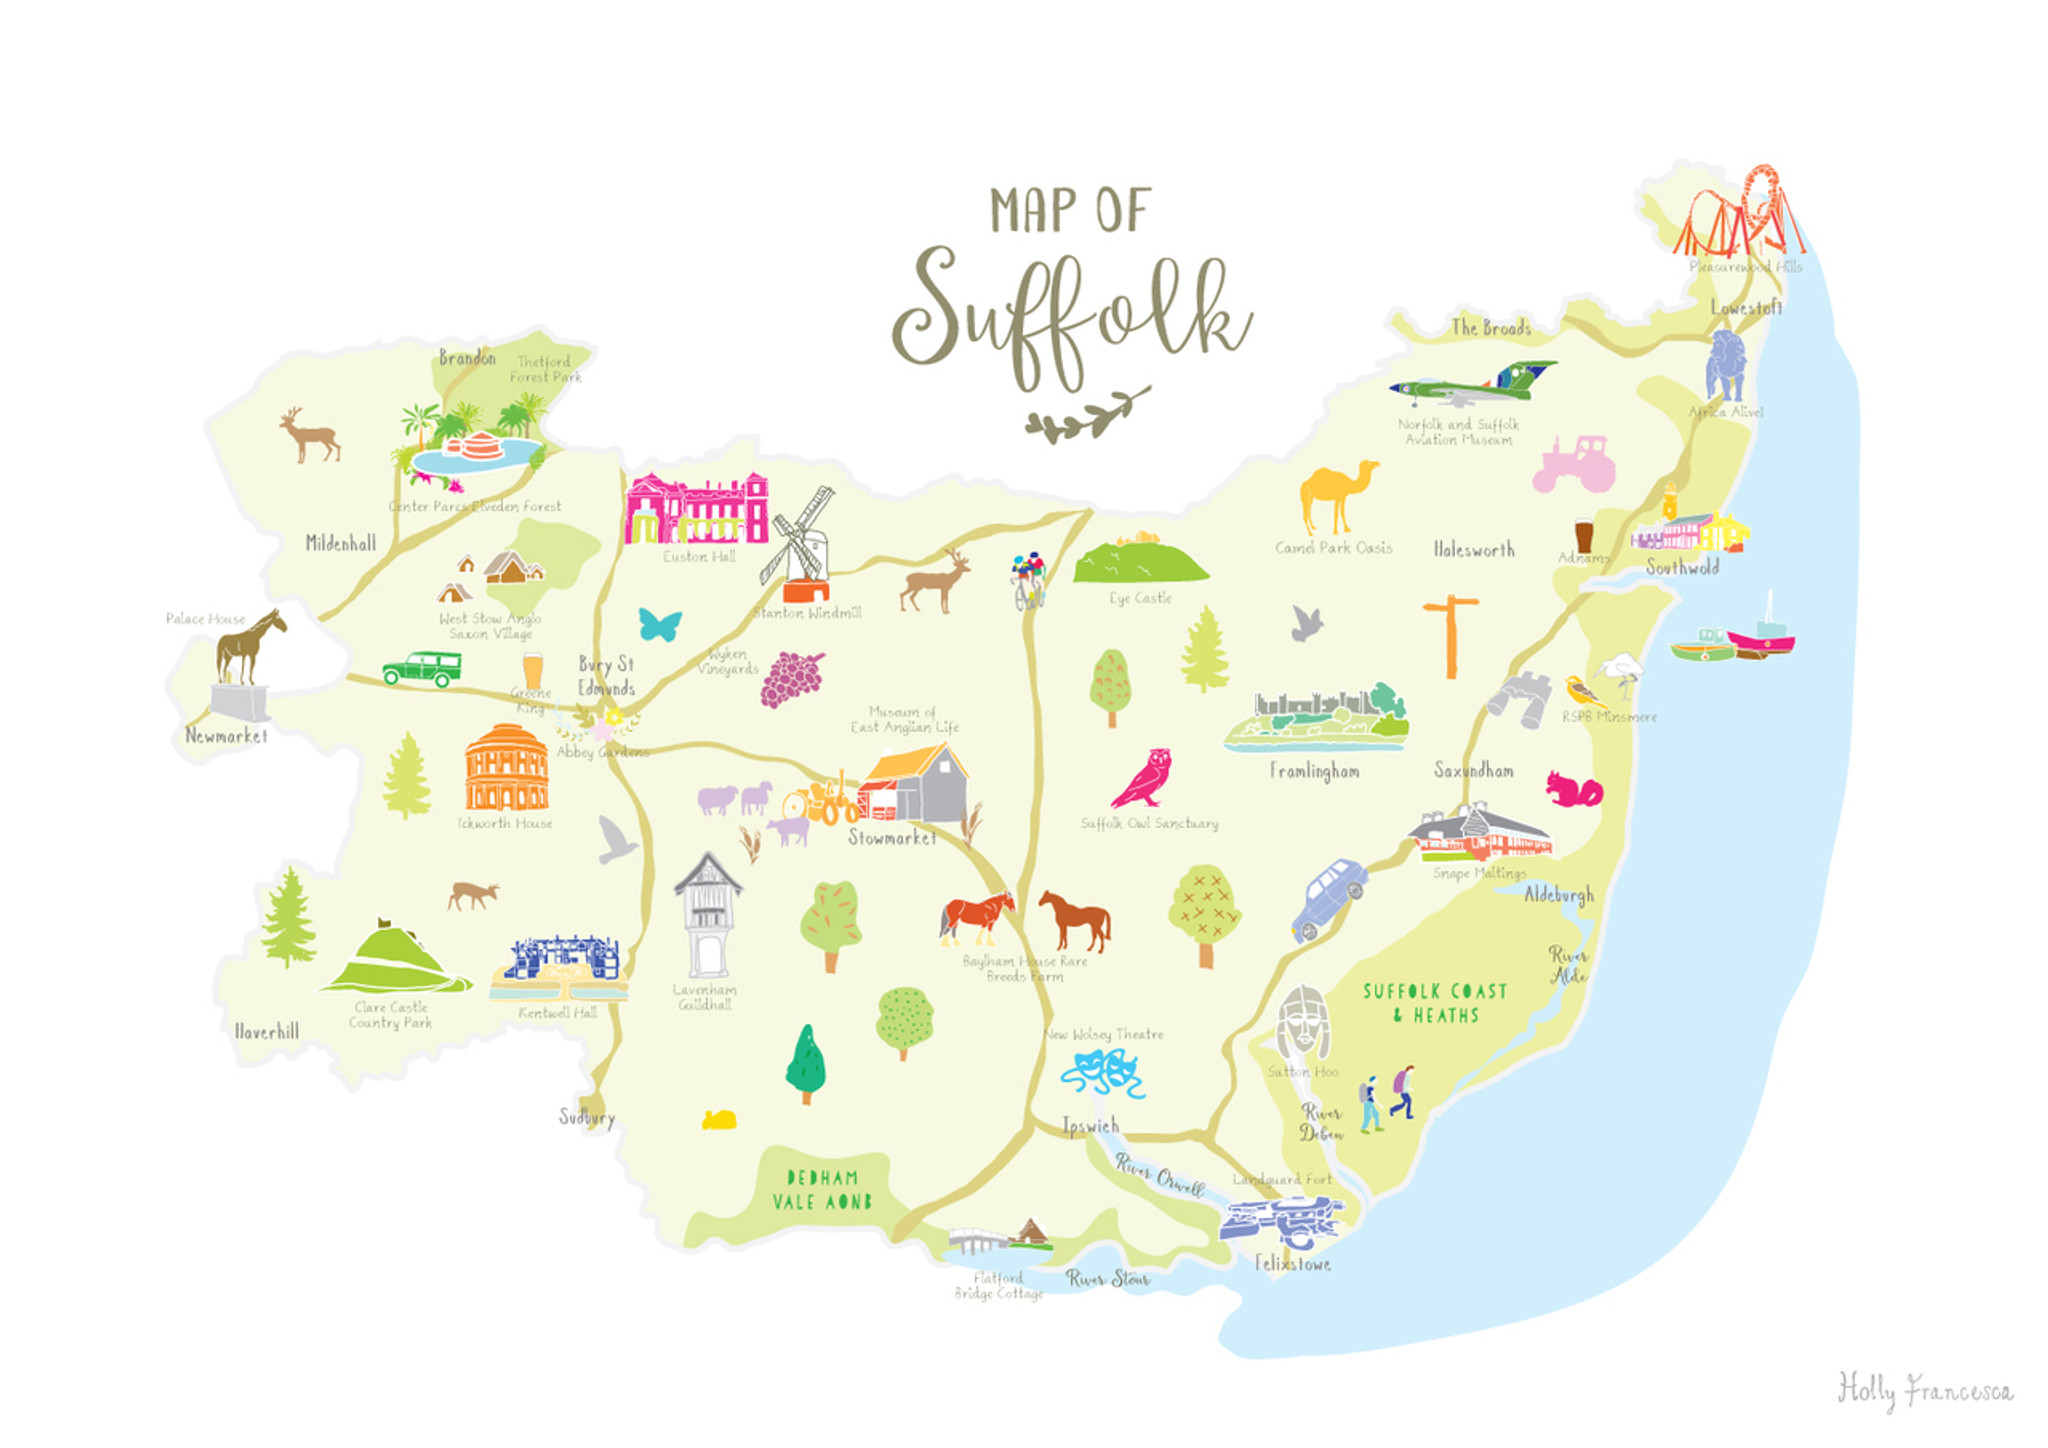 Illustrated hand drawn Map of Suffolk by UK artist Holly Francesca.